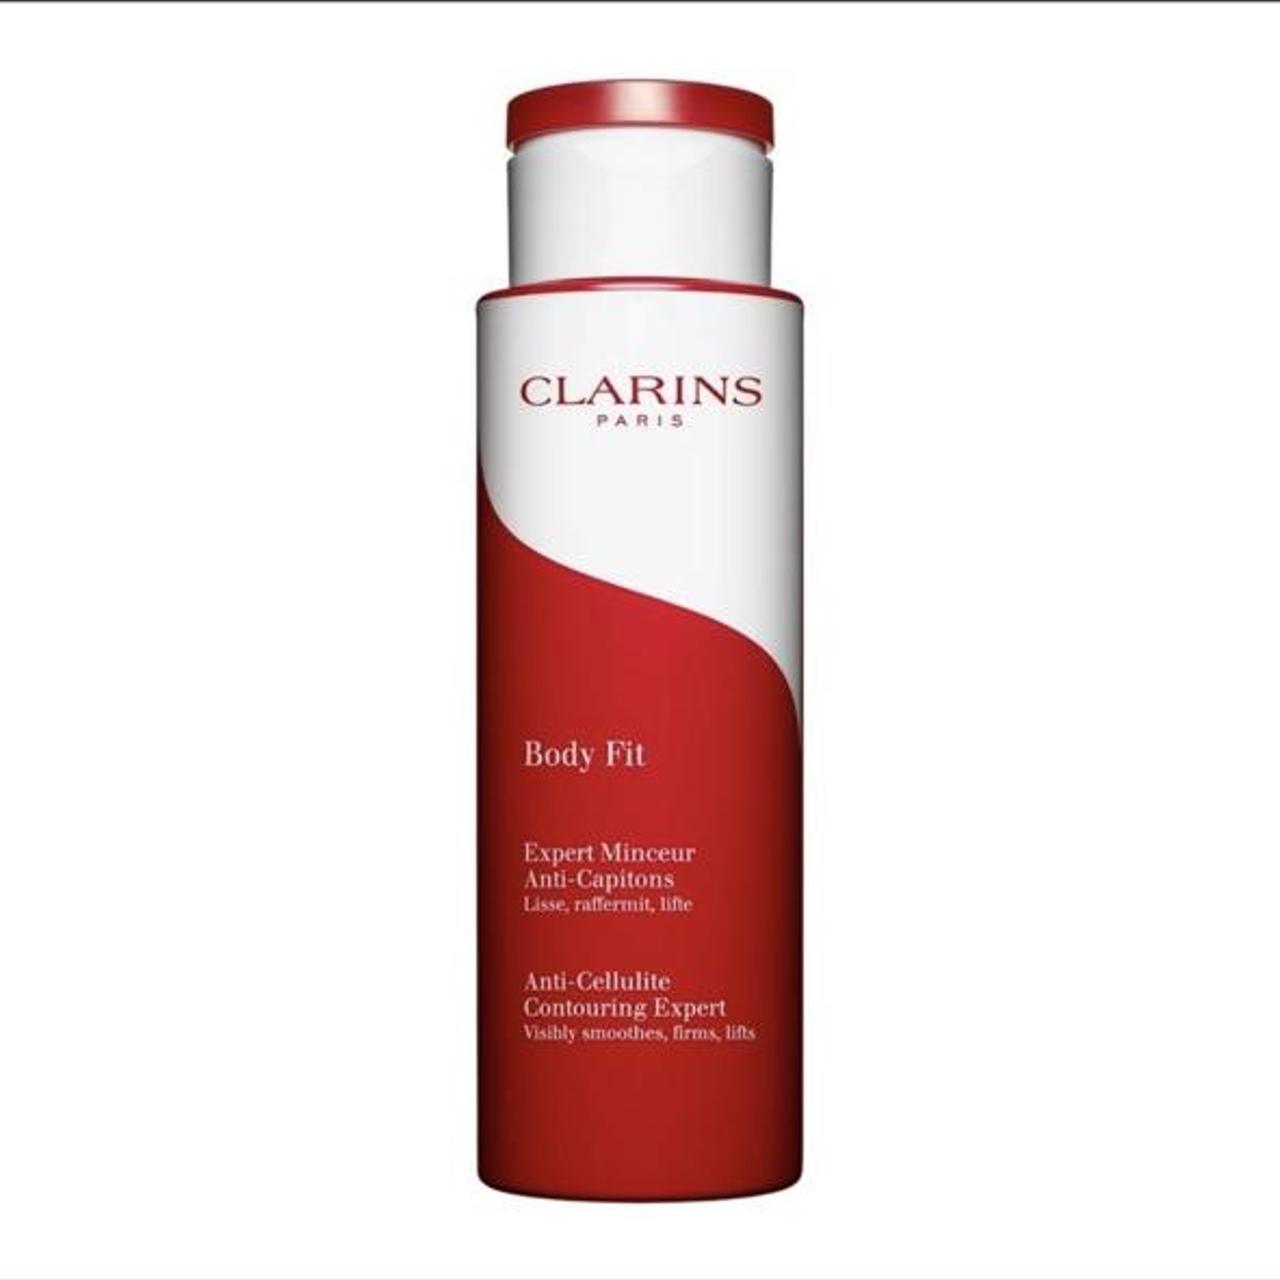 Product Image 1 - Clarins Body Fit
Unopened and in